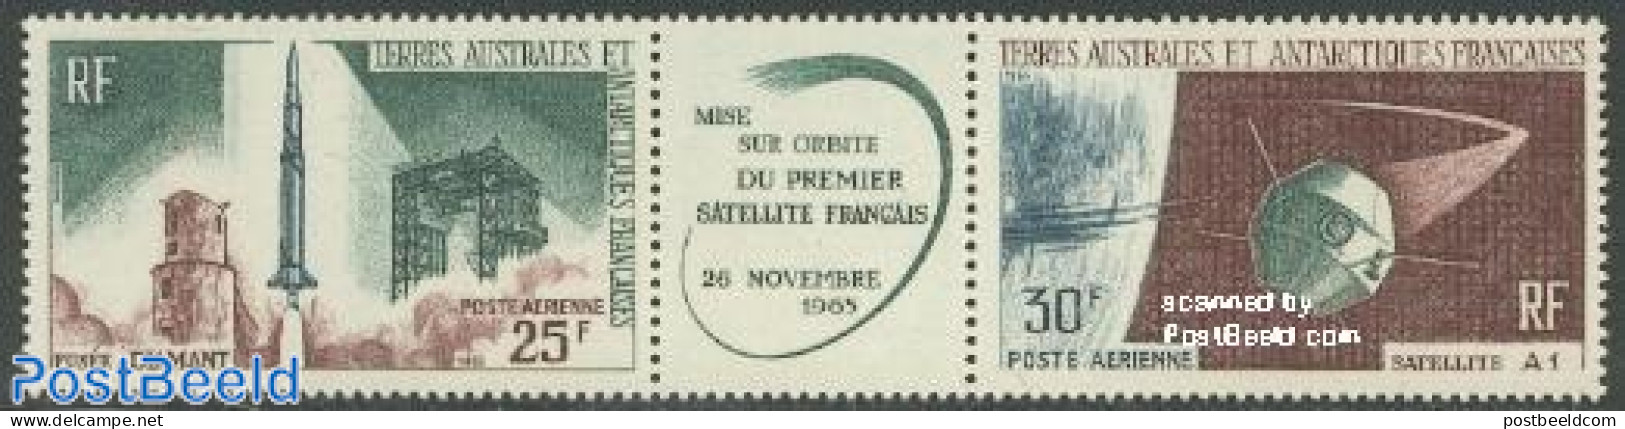 French Antarctic Territory 1966 Satellites 2v+tab [:T:], Mint NH, Transport - Various - Space Exploration - Joint Issues - Nuovi